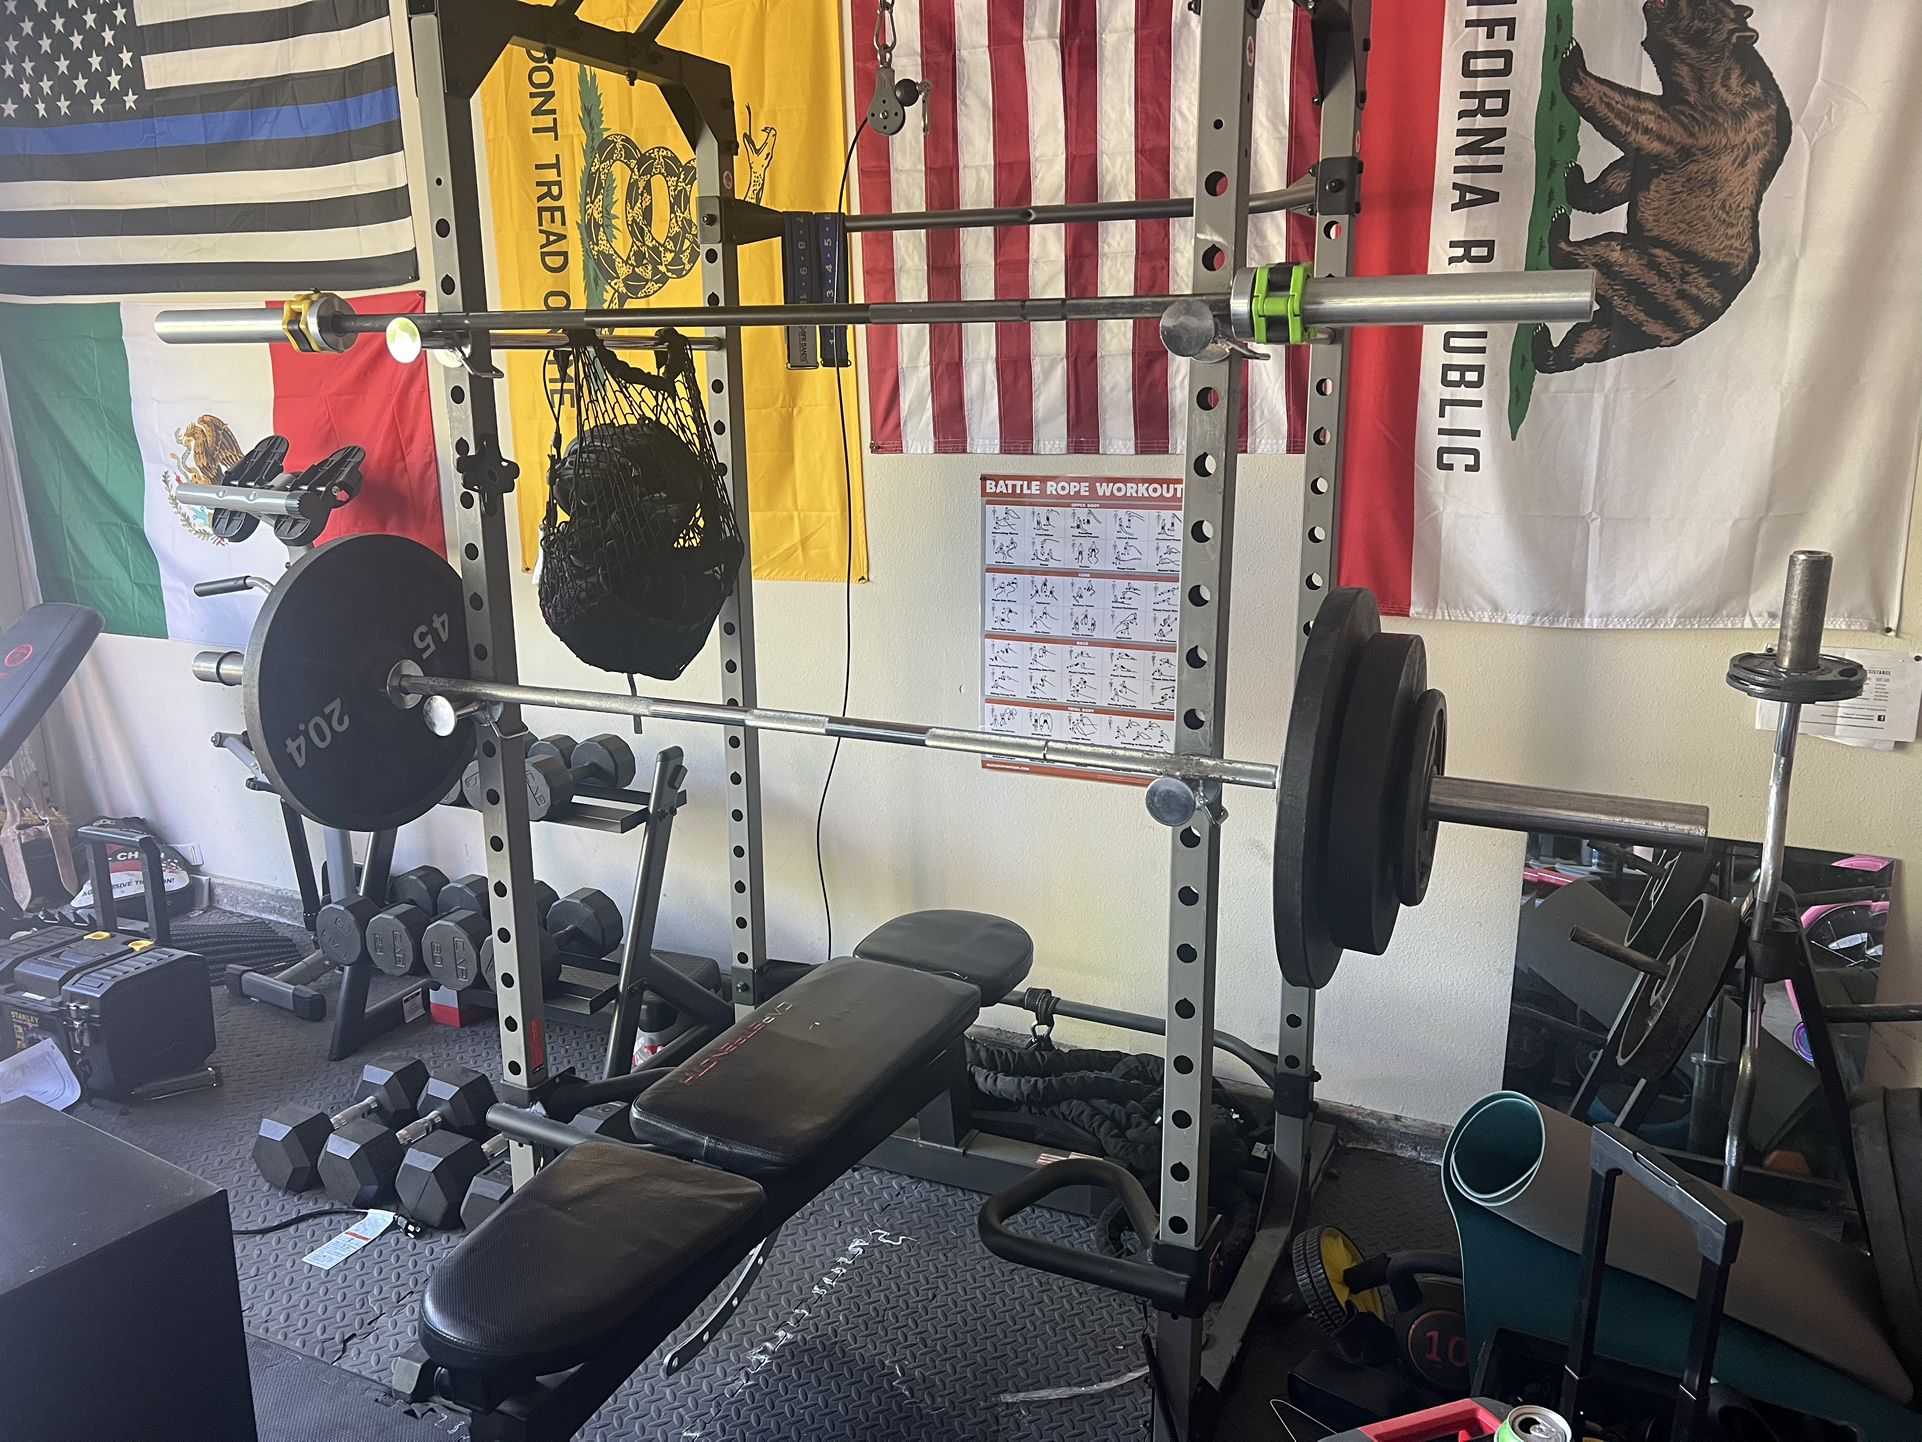 Power Rack Weights And Dumbbells Perfect Start Equipment  550 OBO